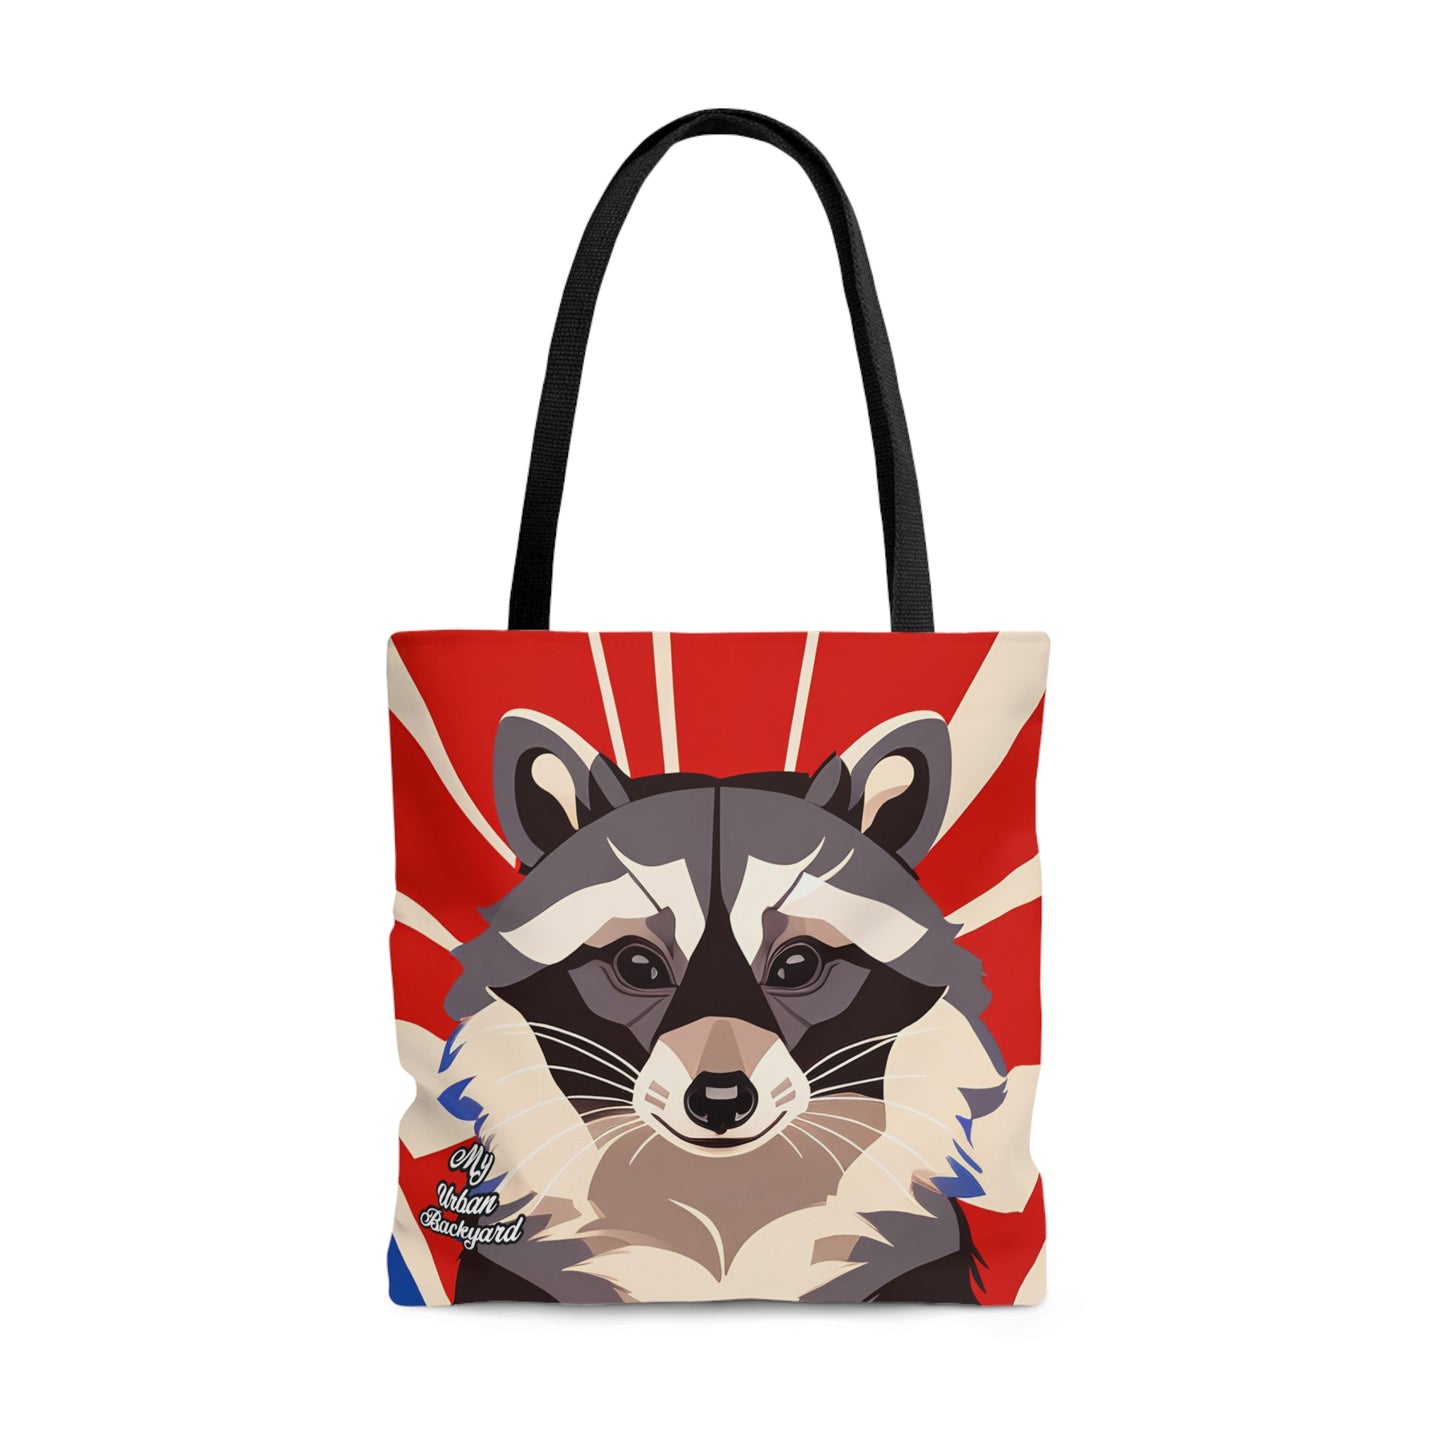 Raccoon on Art Deco Rays, Tote Bag for Everyday Use - Durable and Functional